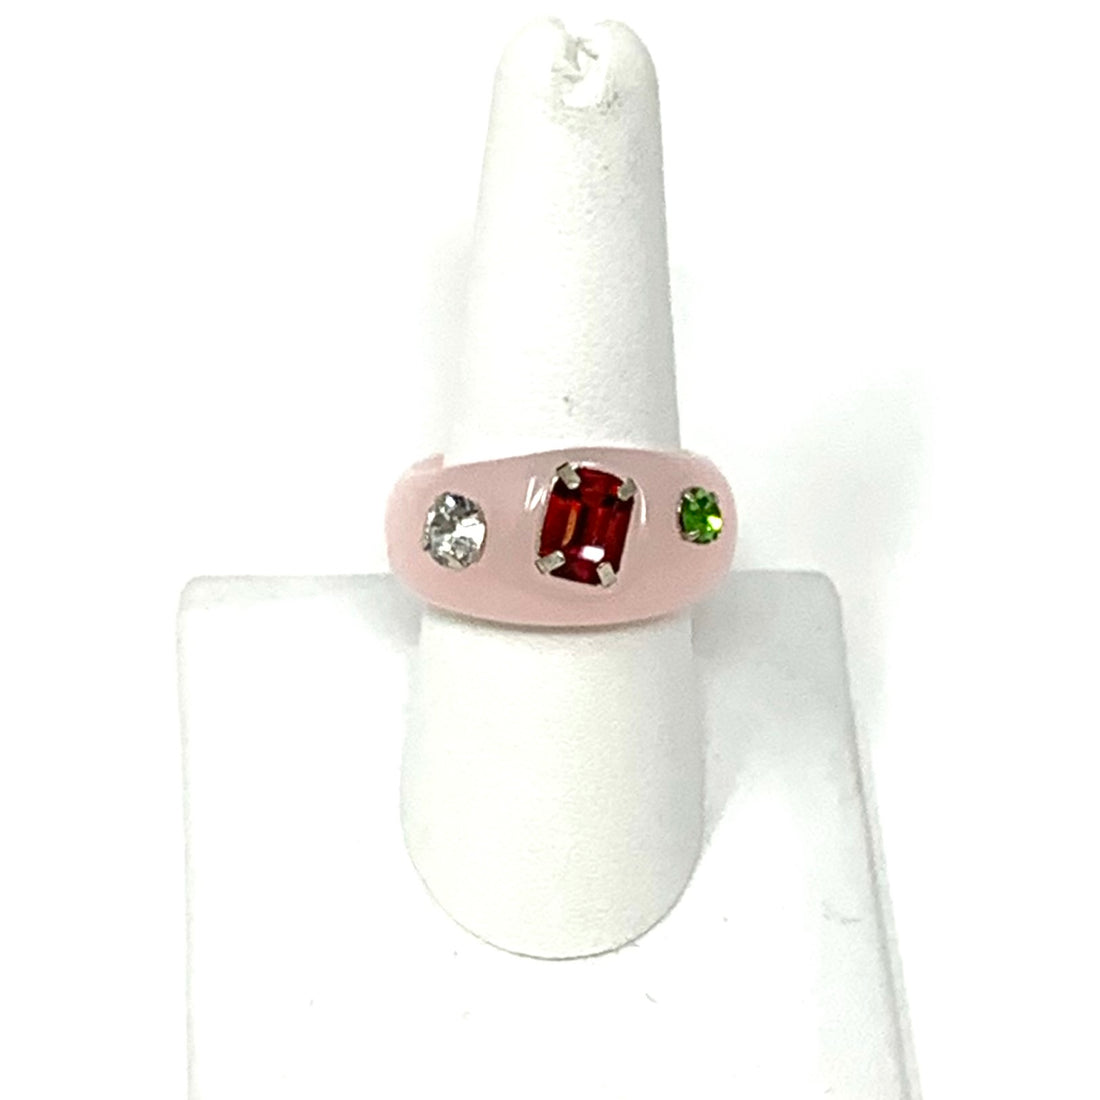 Resin Band Ring in Soft Pink with Jewels